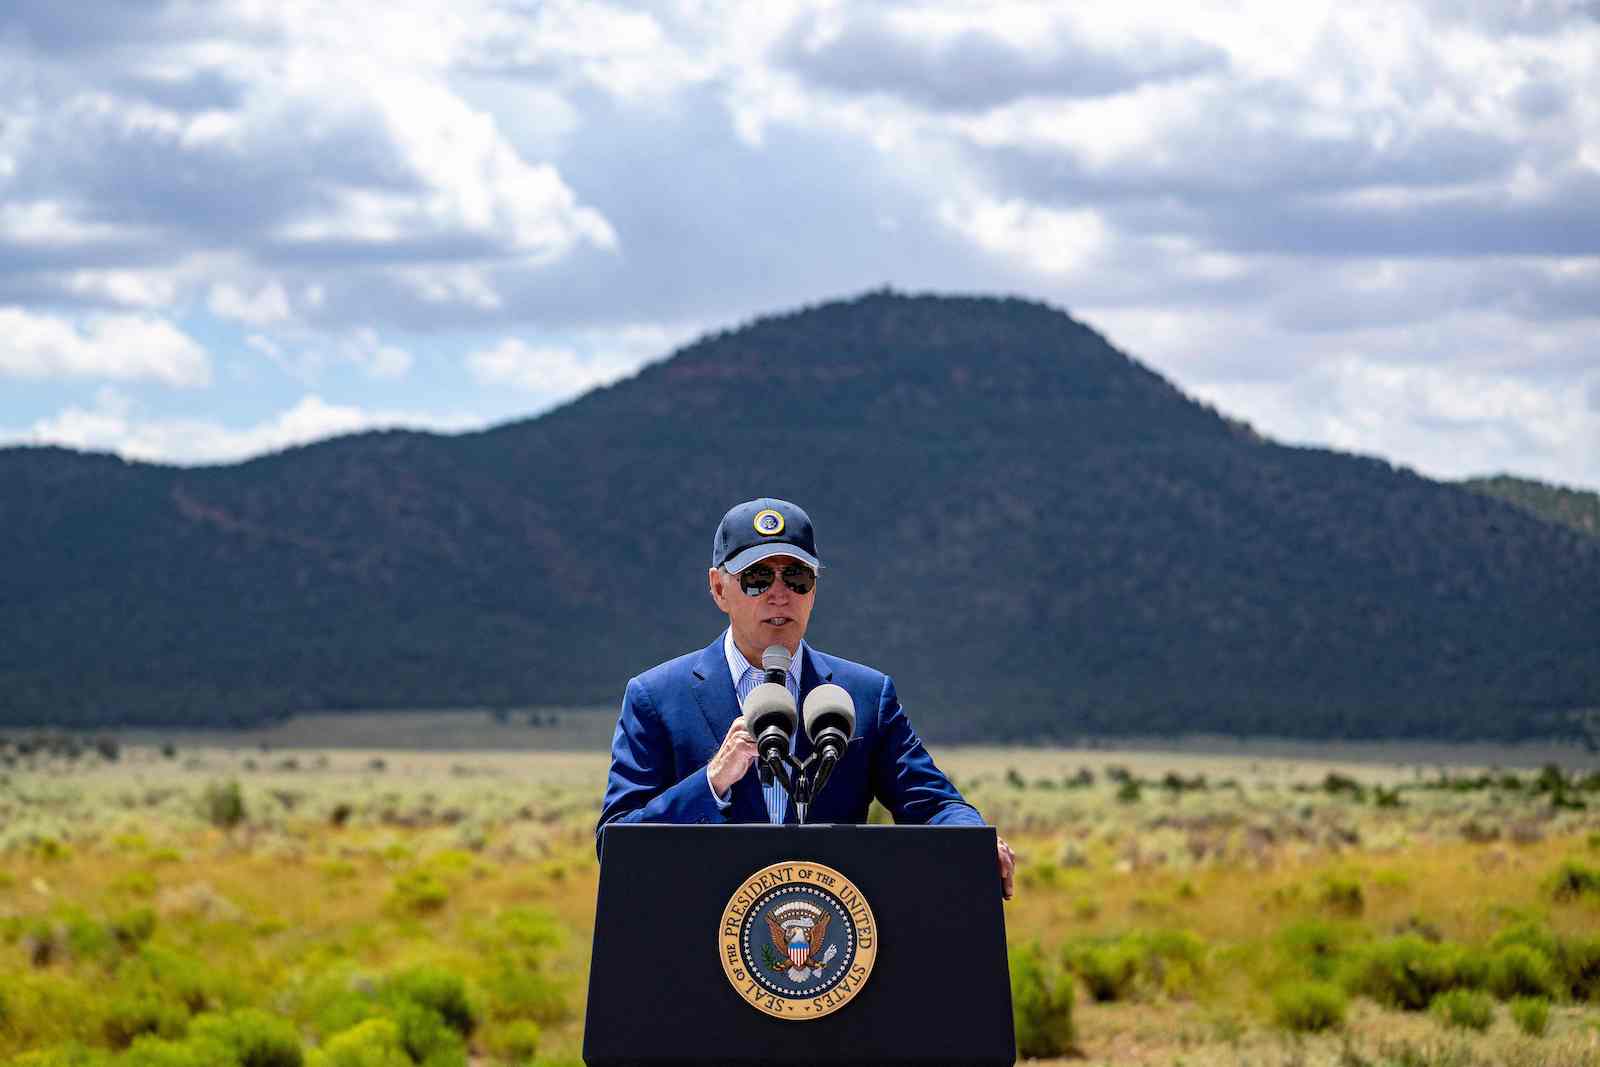 a man in a hat and suit stands in front of a podium with the presidential seal. Behind him, a beautiful field and mountain